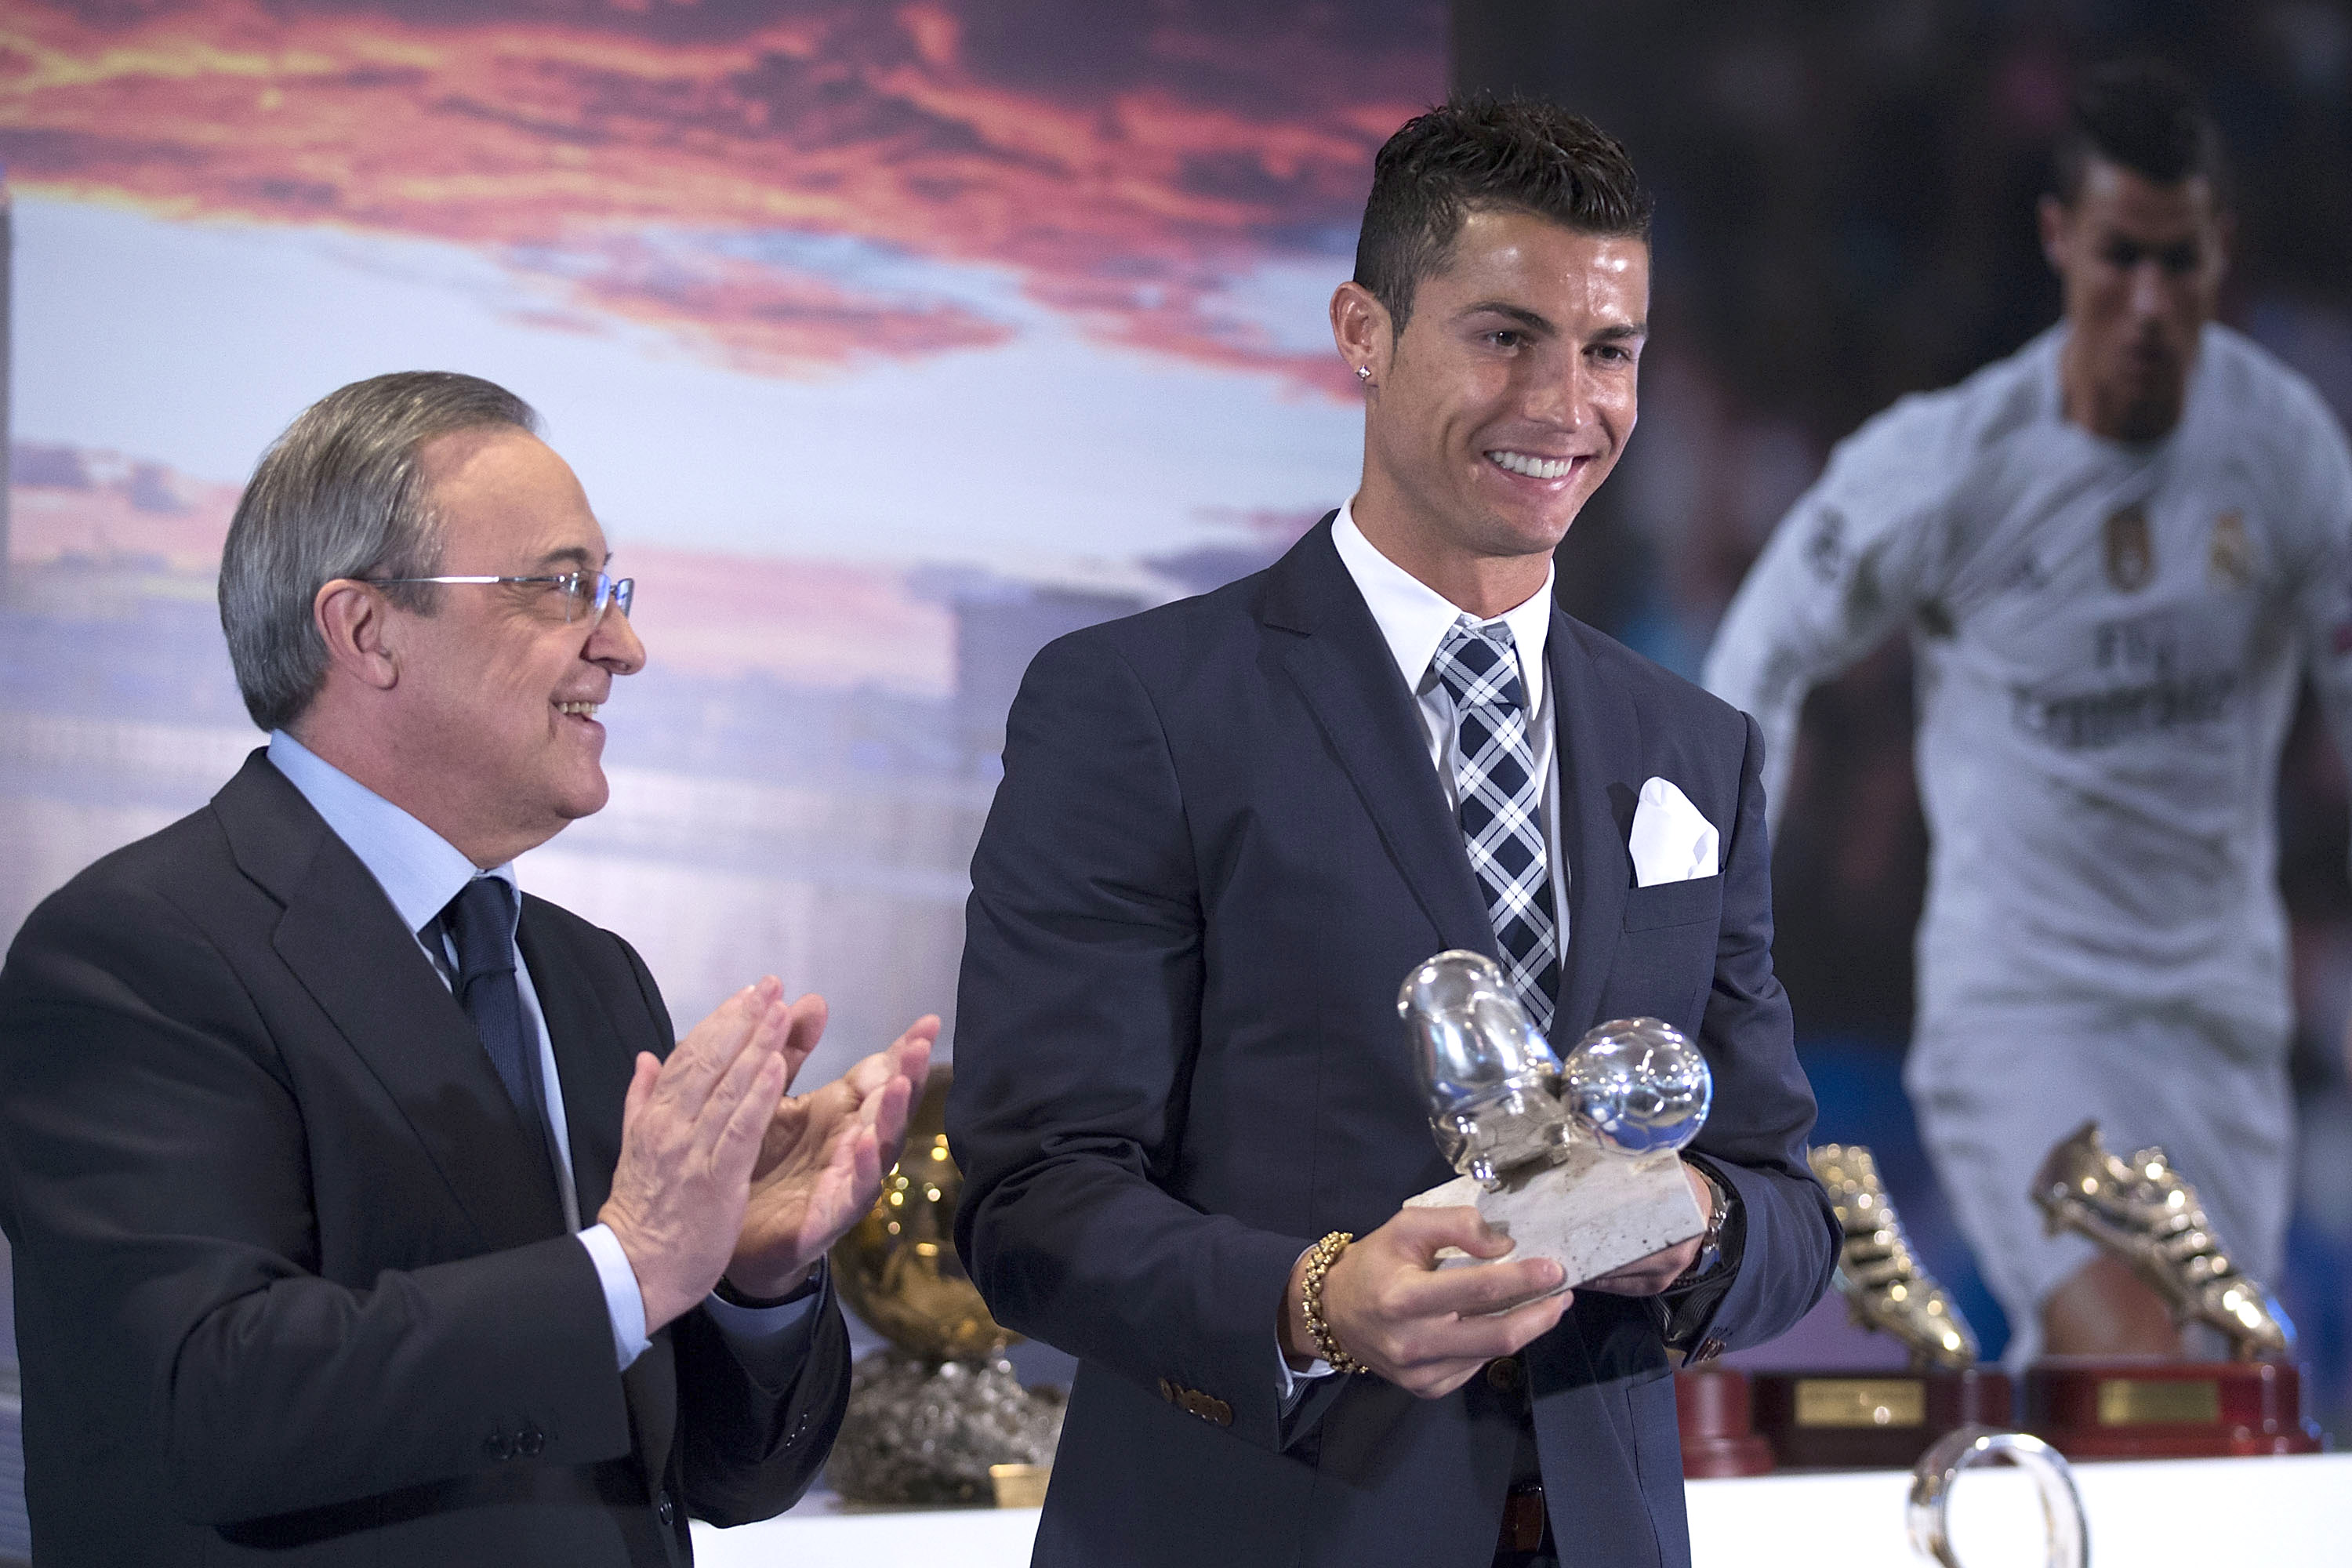 MADRID, SPAIN - OCTOBER 02:  Cristiano Ronaldo poses with the trophy as all-time top scorer of Real Madrid CF  and president Florentino Perez at Honour box-seat of Santiago Bernabeu  Stadium on October 2, 2015 in Madrid, Spain. Portuguese palyer Cristiano Ronaldo overtook on his last UEFA Champions League match against Malmo FF Raul,s record as Real Madrid all-time top scorer.  (Photo by Gonzalo Arroyo Moreno/Getty Images)